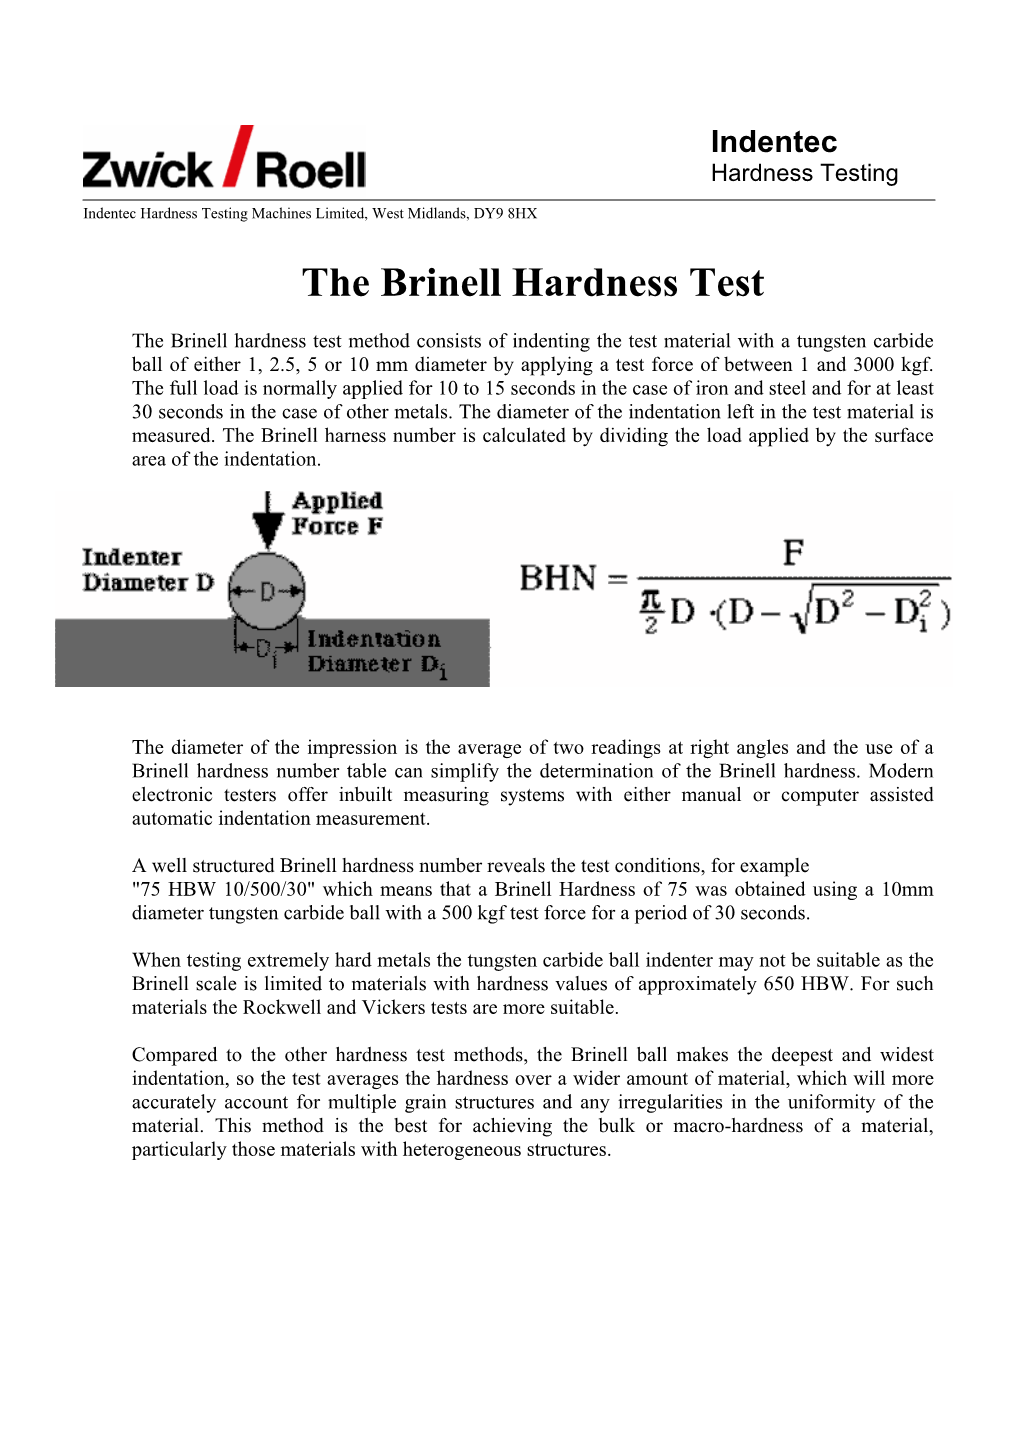 The Brinell Hardness Test